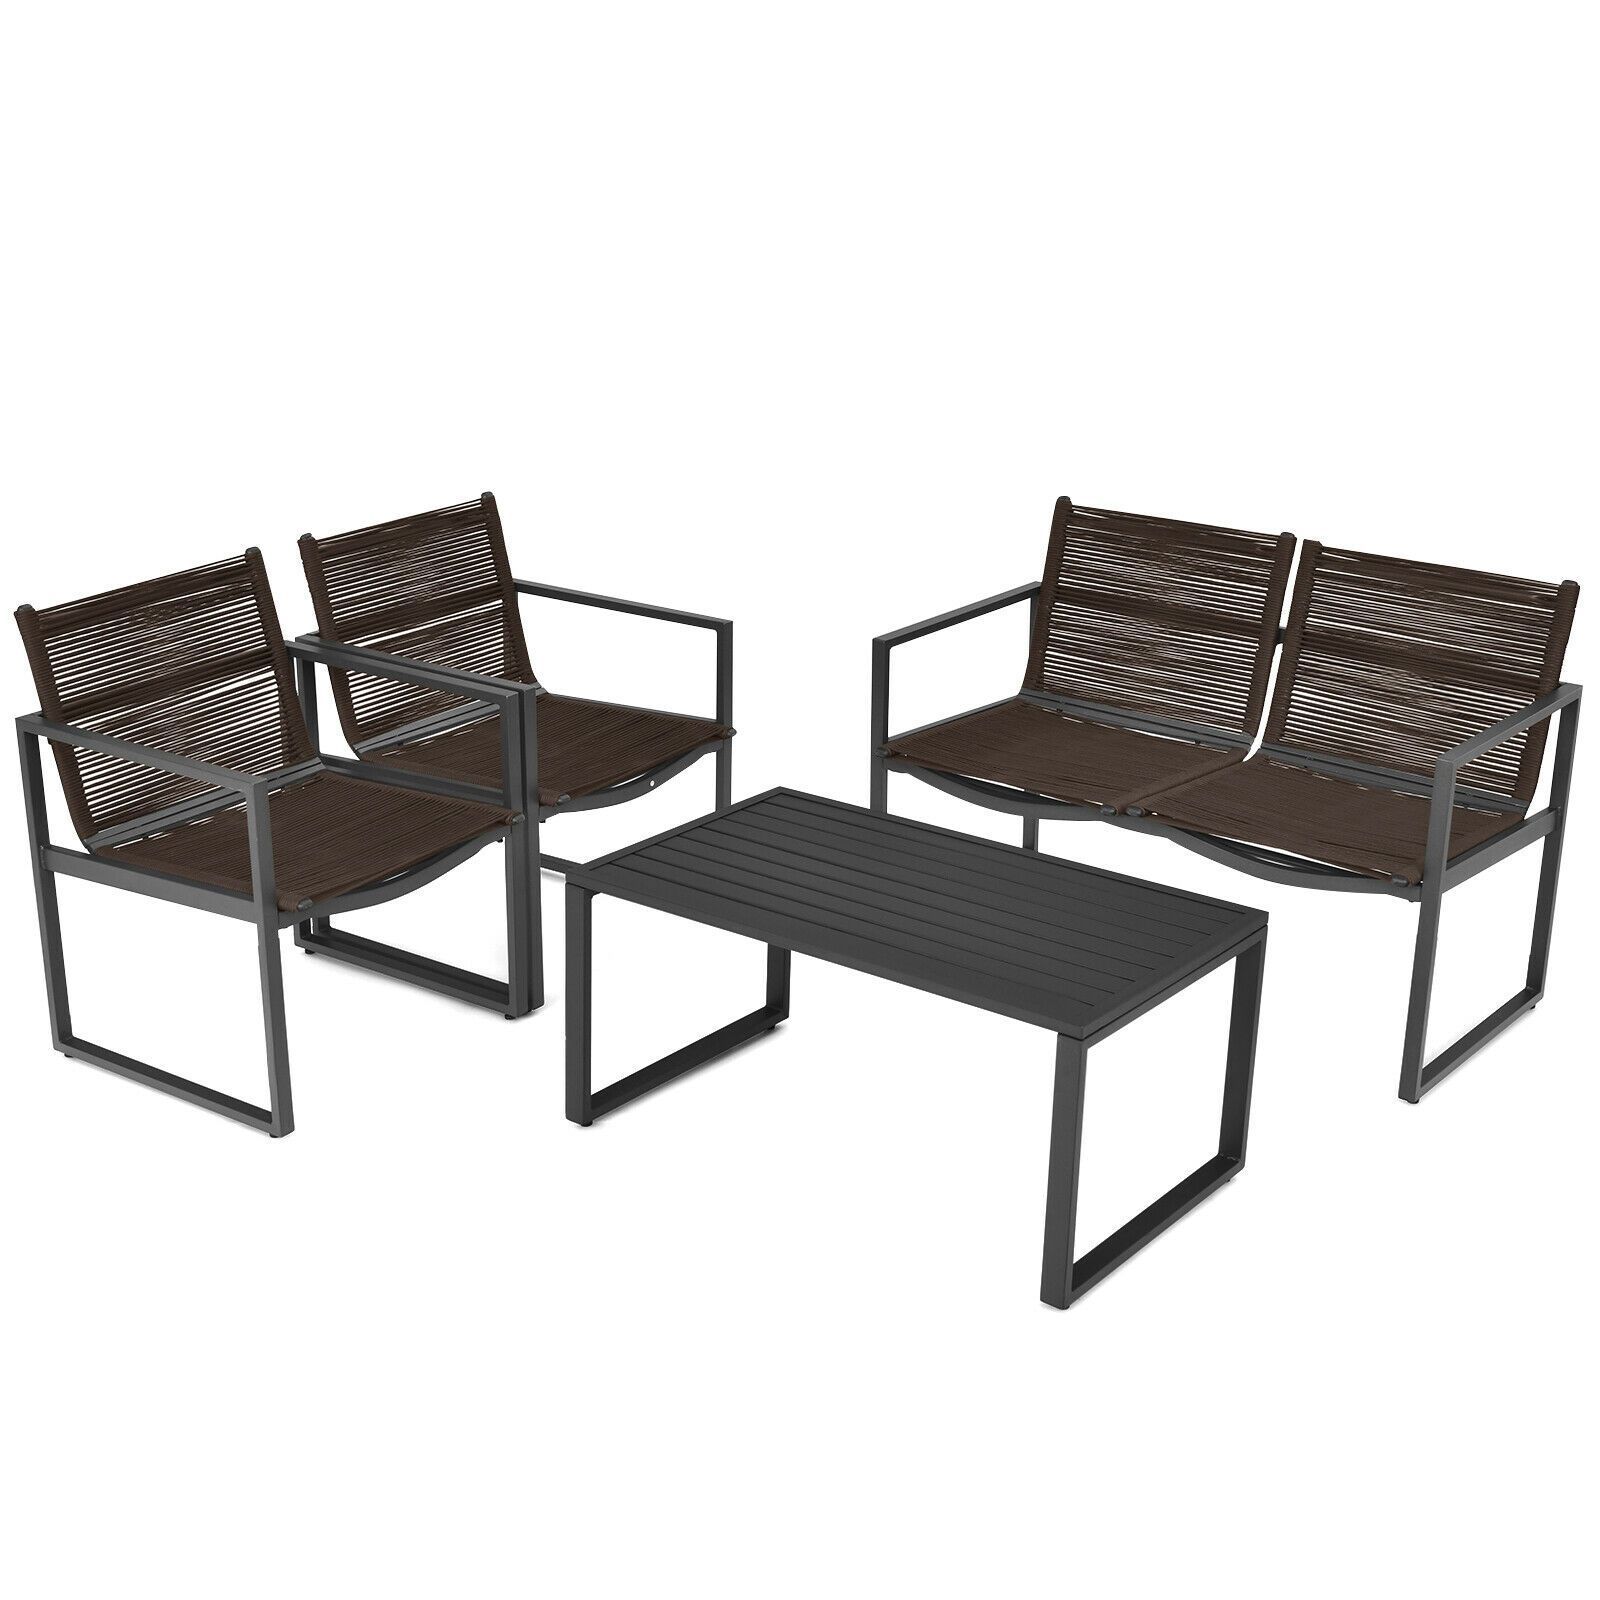 4 Piece Patio Furniture Set with Loveseat Single Chairs and Table